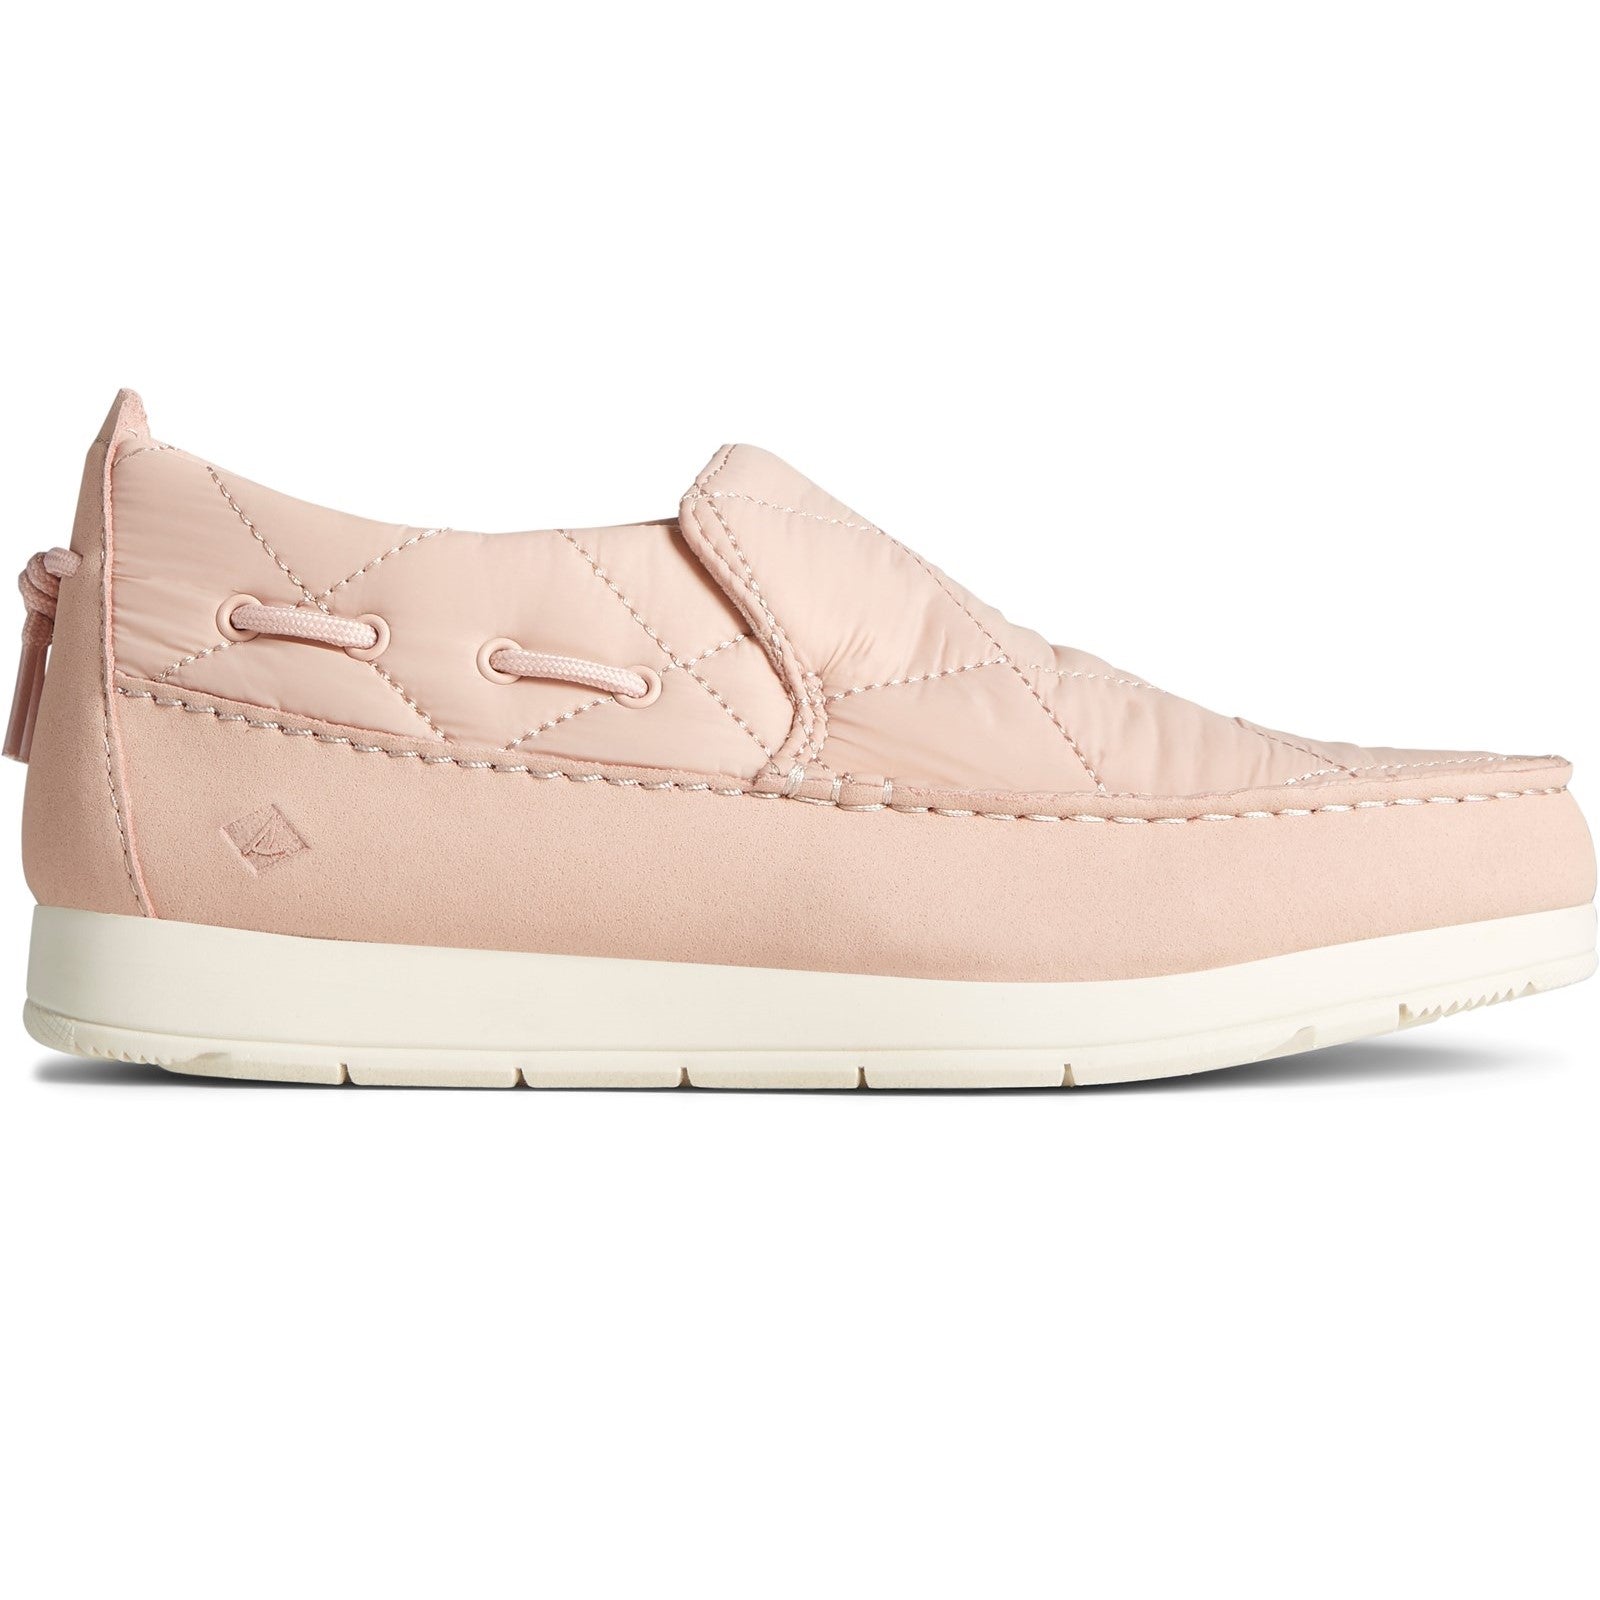 Sperry Womens Moc-Sider Nylon Slip On Trainers - Pink